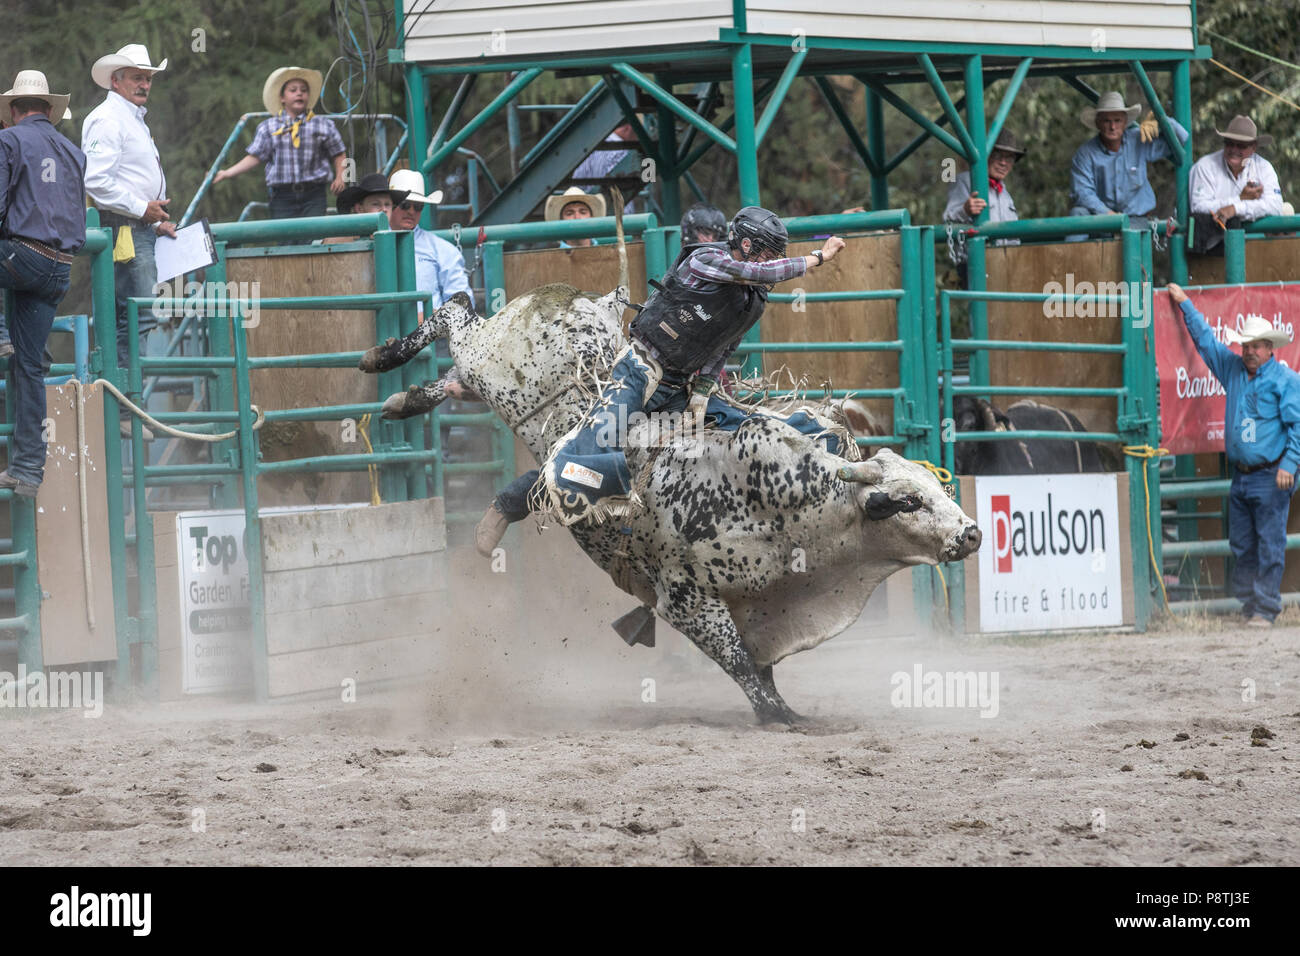 Bull Riding, rodeo's most exciting and dangerous sport. Huge bulls trying to throw the cowboys from there back. Cranbrook, BC, Canada. Tomothy Lipsett Stock Photo